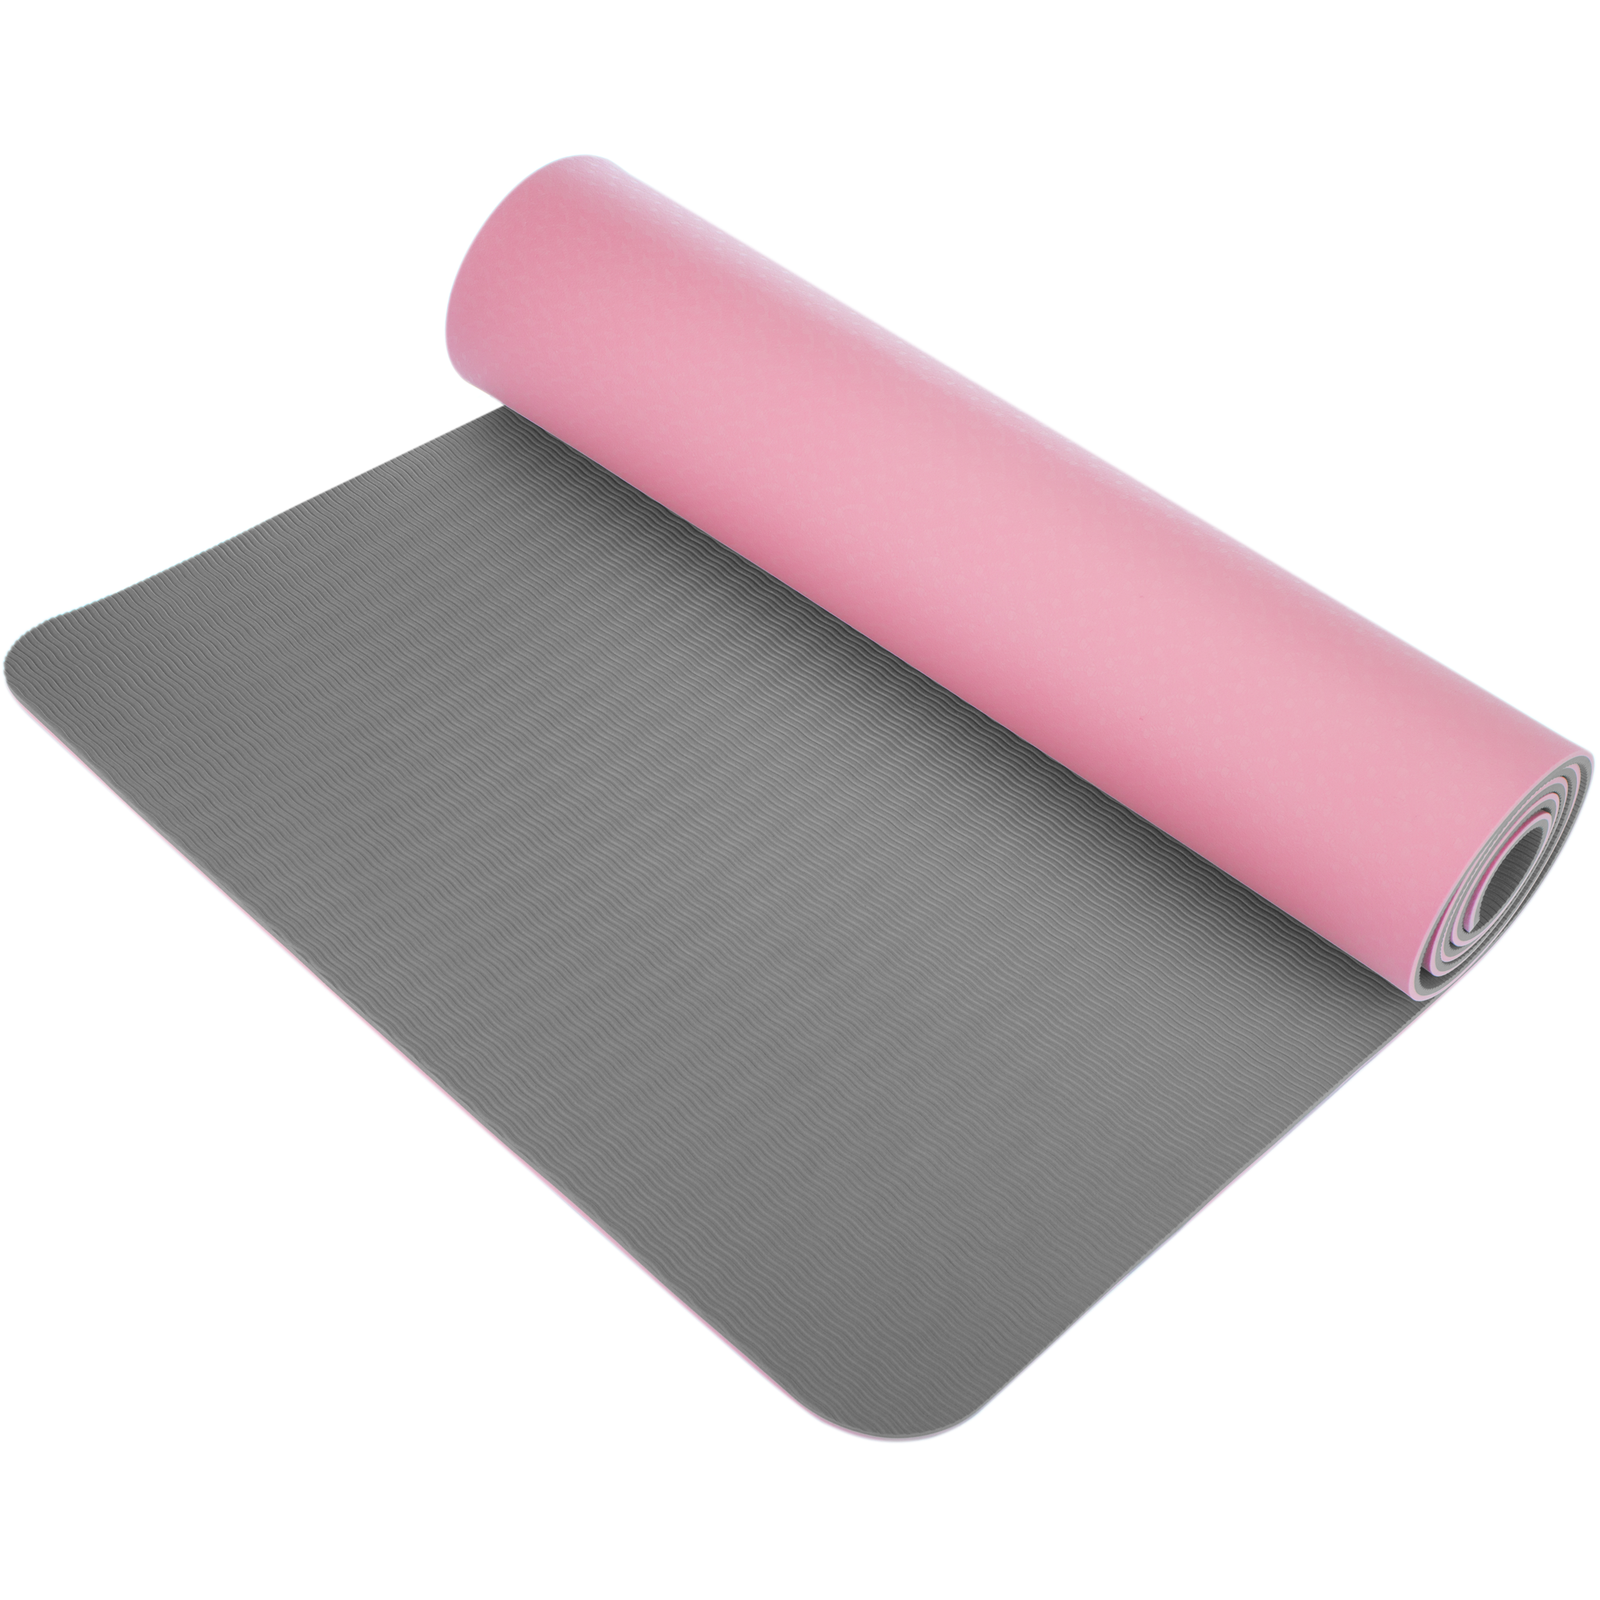 Bestaan overal kanker Anti slip dubbellaagse roze Yoga mat 183x61x0.6 cm - Cablematic